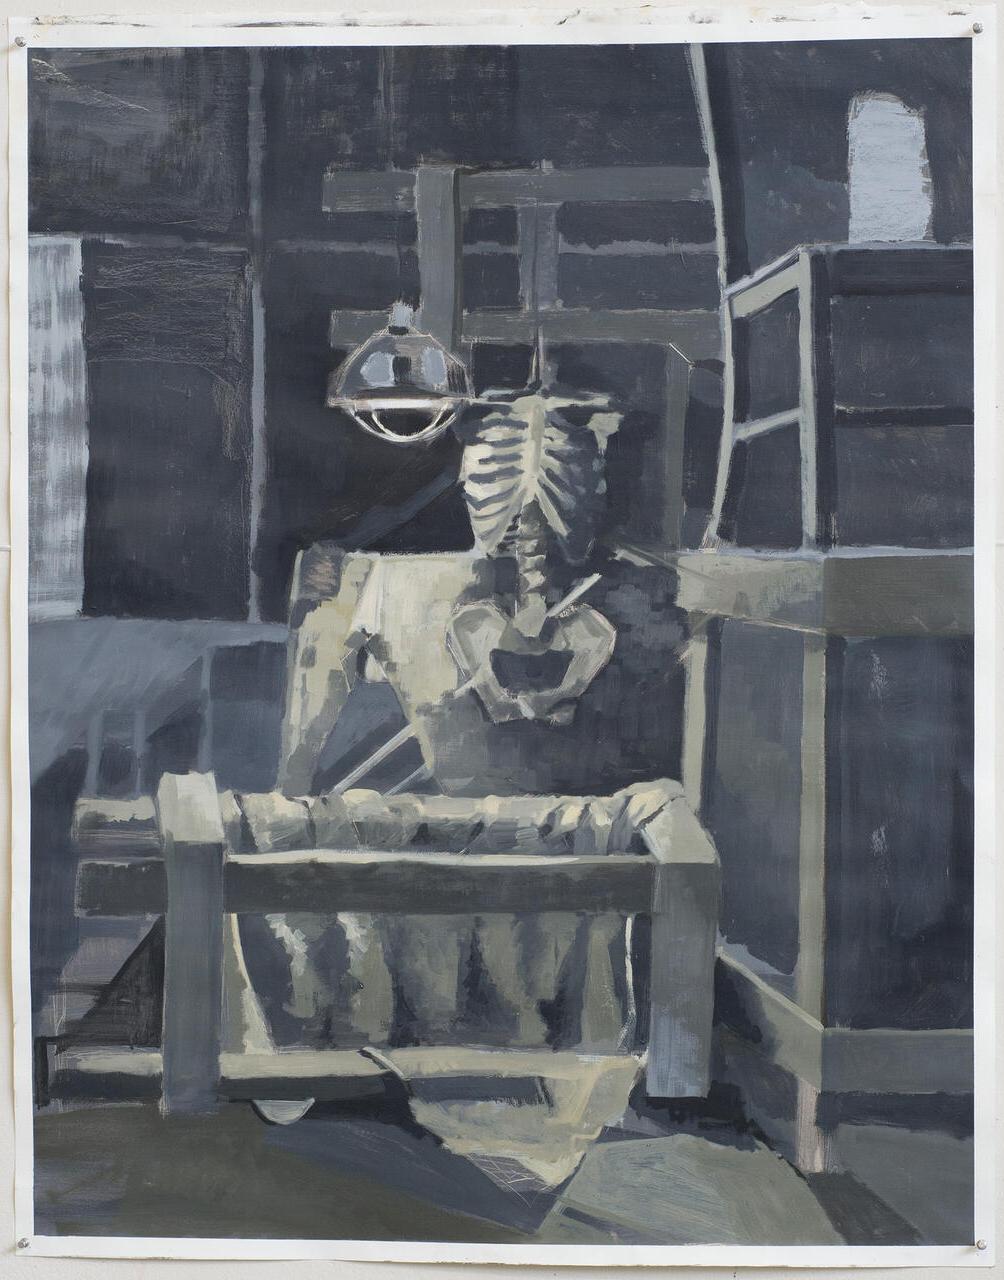 Still life painting emphasizing a skeleton in the center of the composition.